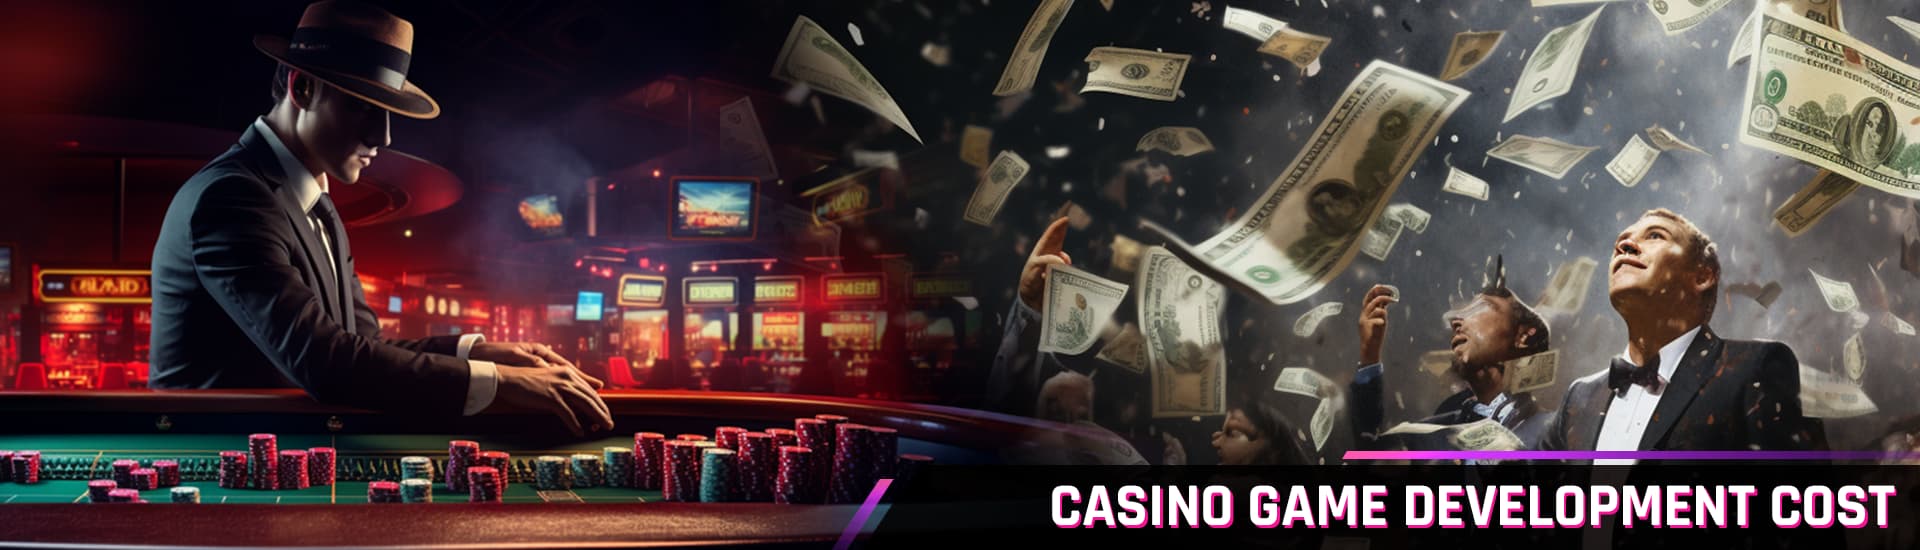 We are turning on a new game engine for online casino games!